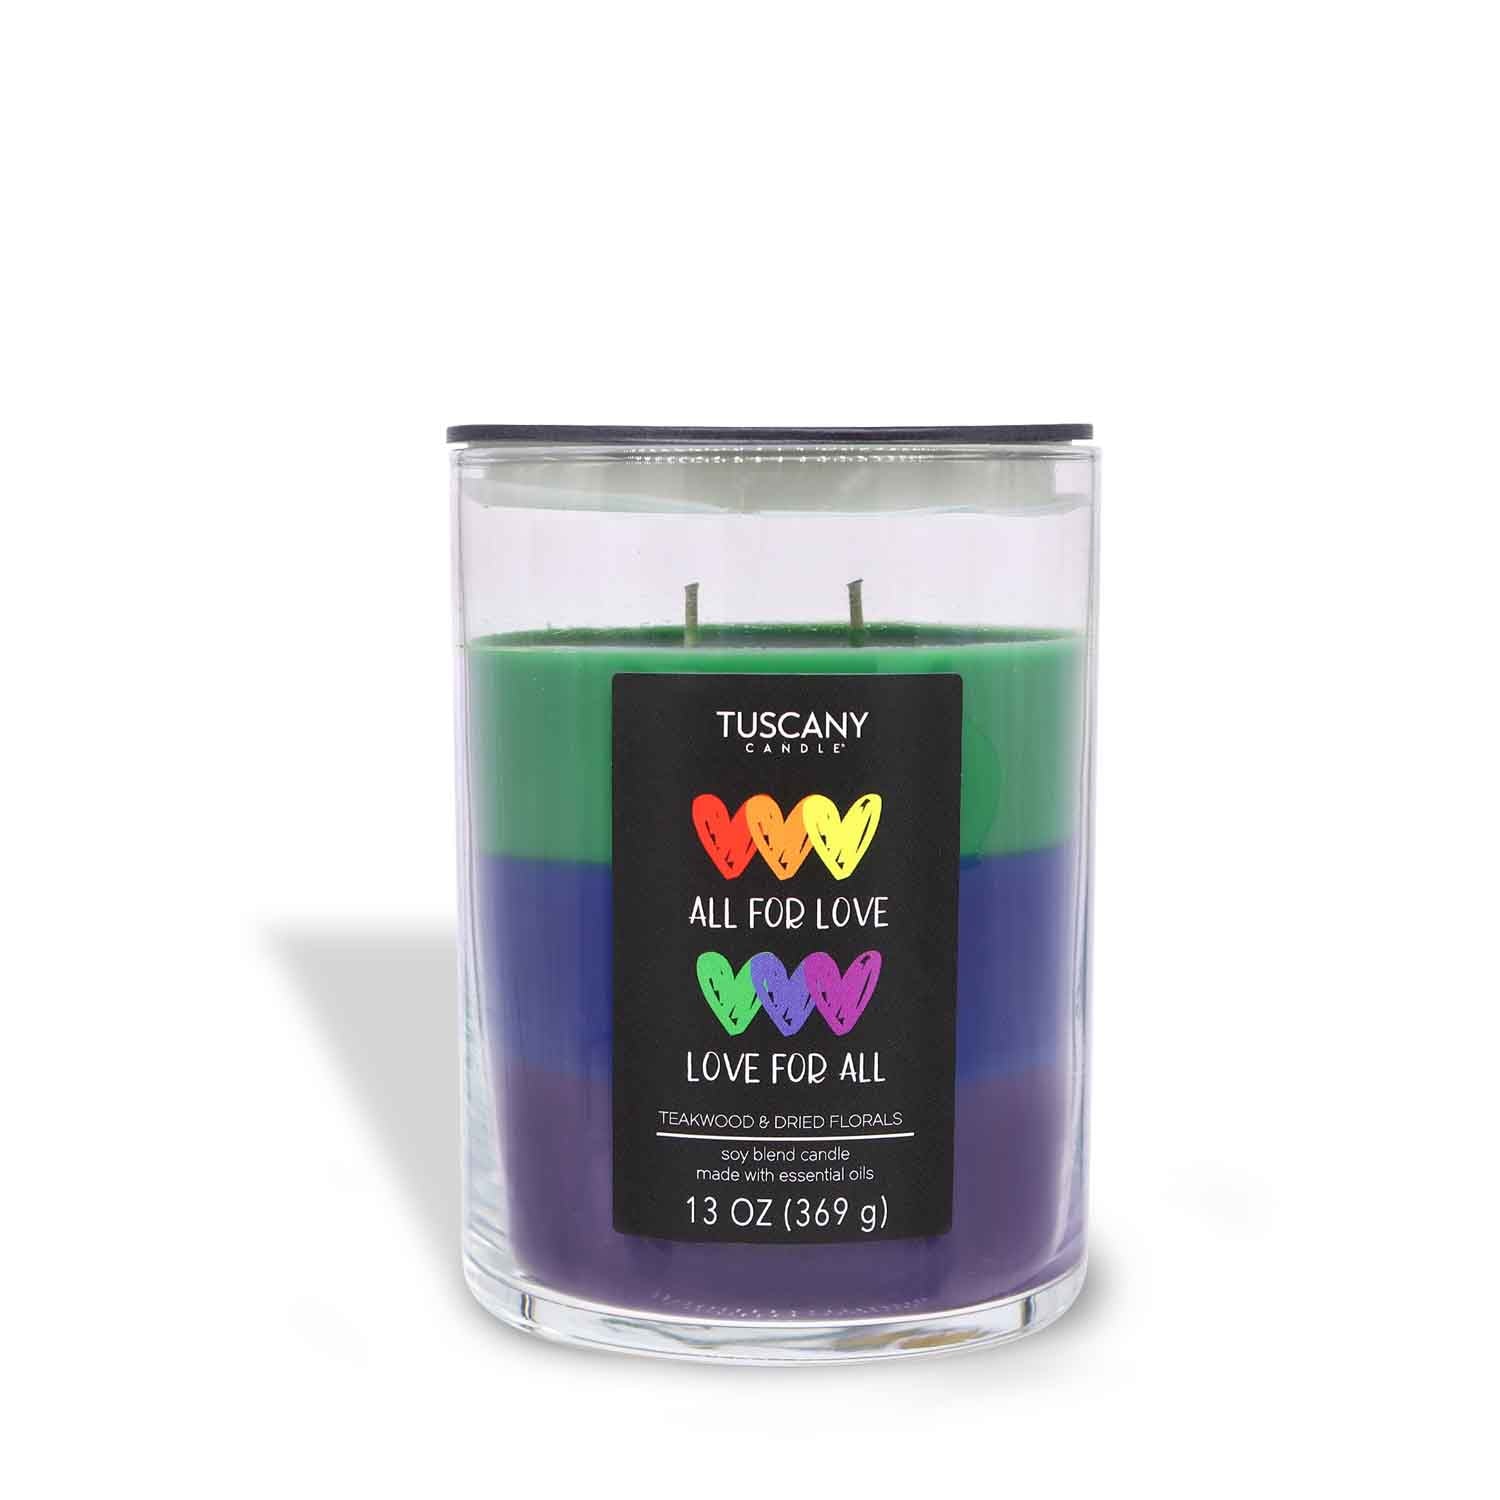 A All For Love Scented Jar Candle (13 oz) from the Tuscany Candle® SEASONAL Pride Collection with the words "all you need is love".